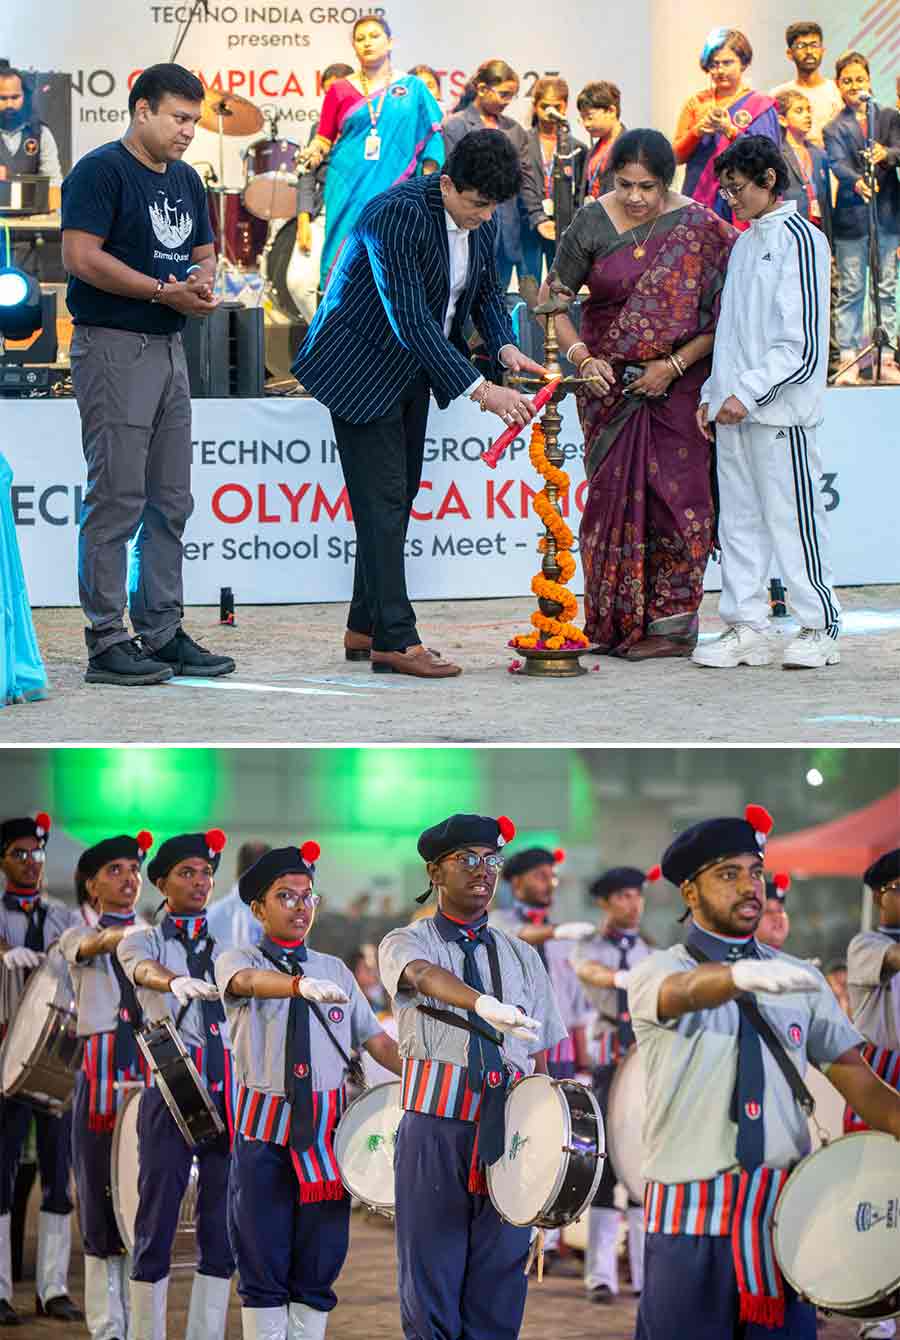 The third edition of Techno India Group's inter school sports competition Techno Olympica Knights was inaugurated on Thursday. Mountaineers Piyali Basak and Satyarup Siddhant; Premjit Sen, referee & judge, World Karate Federation & Asian Karate Federation and Manoshi Roychowdhury, co-chairperson, Techno India Group; were present. Over 1,000 students from 70 schools across West Bengal will participate  